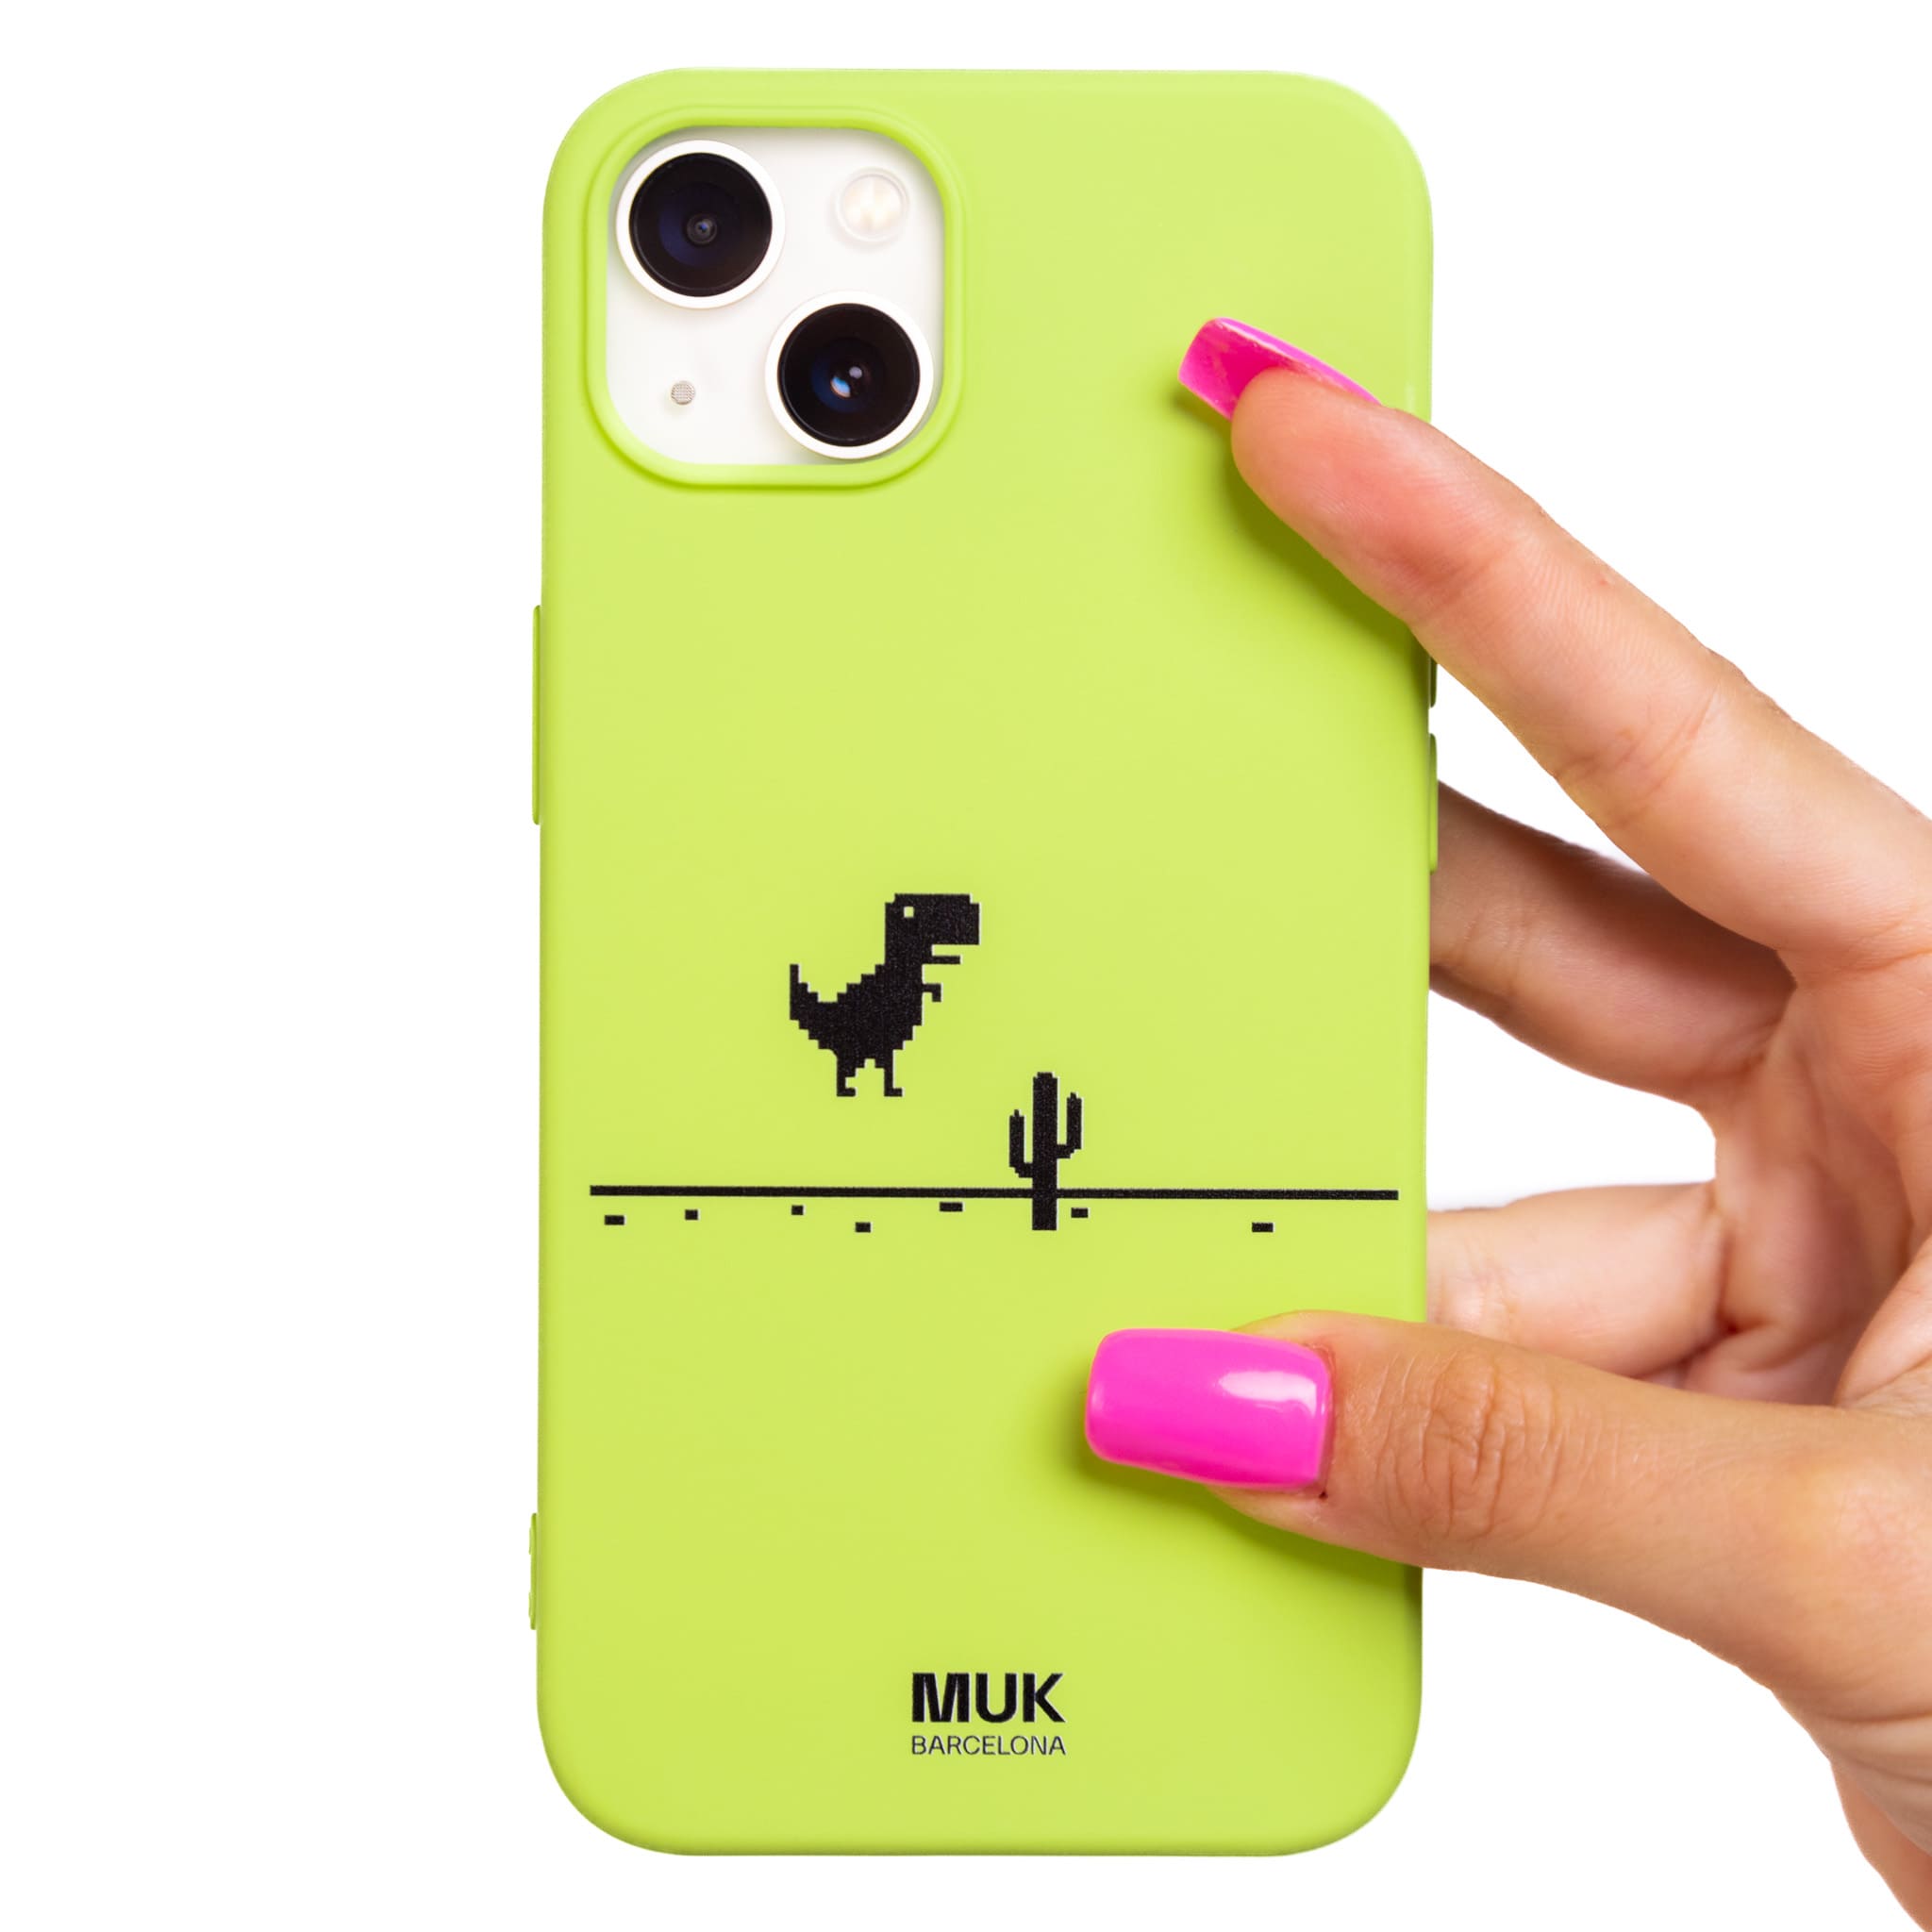  Lime TPU  case with T-REX game design in black.
